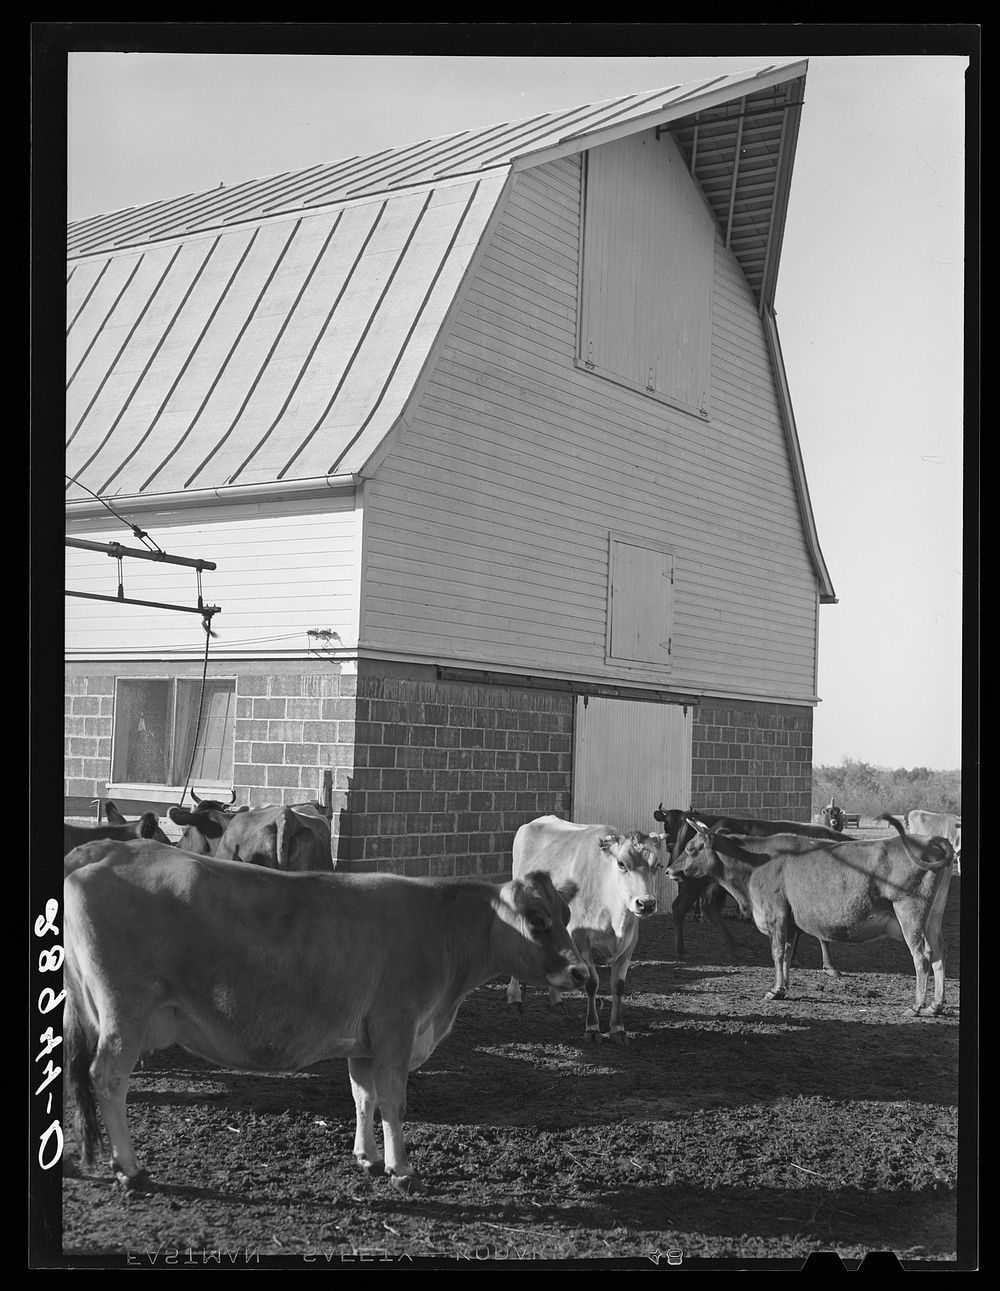 Part of the dairy herd at Bois d'Arc cooperative. Osage Farms, Missouri. Sourced from the Library of Congress.